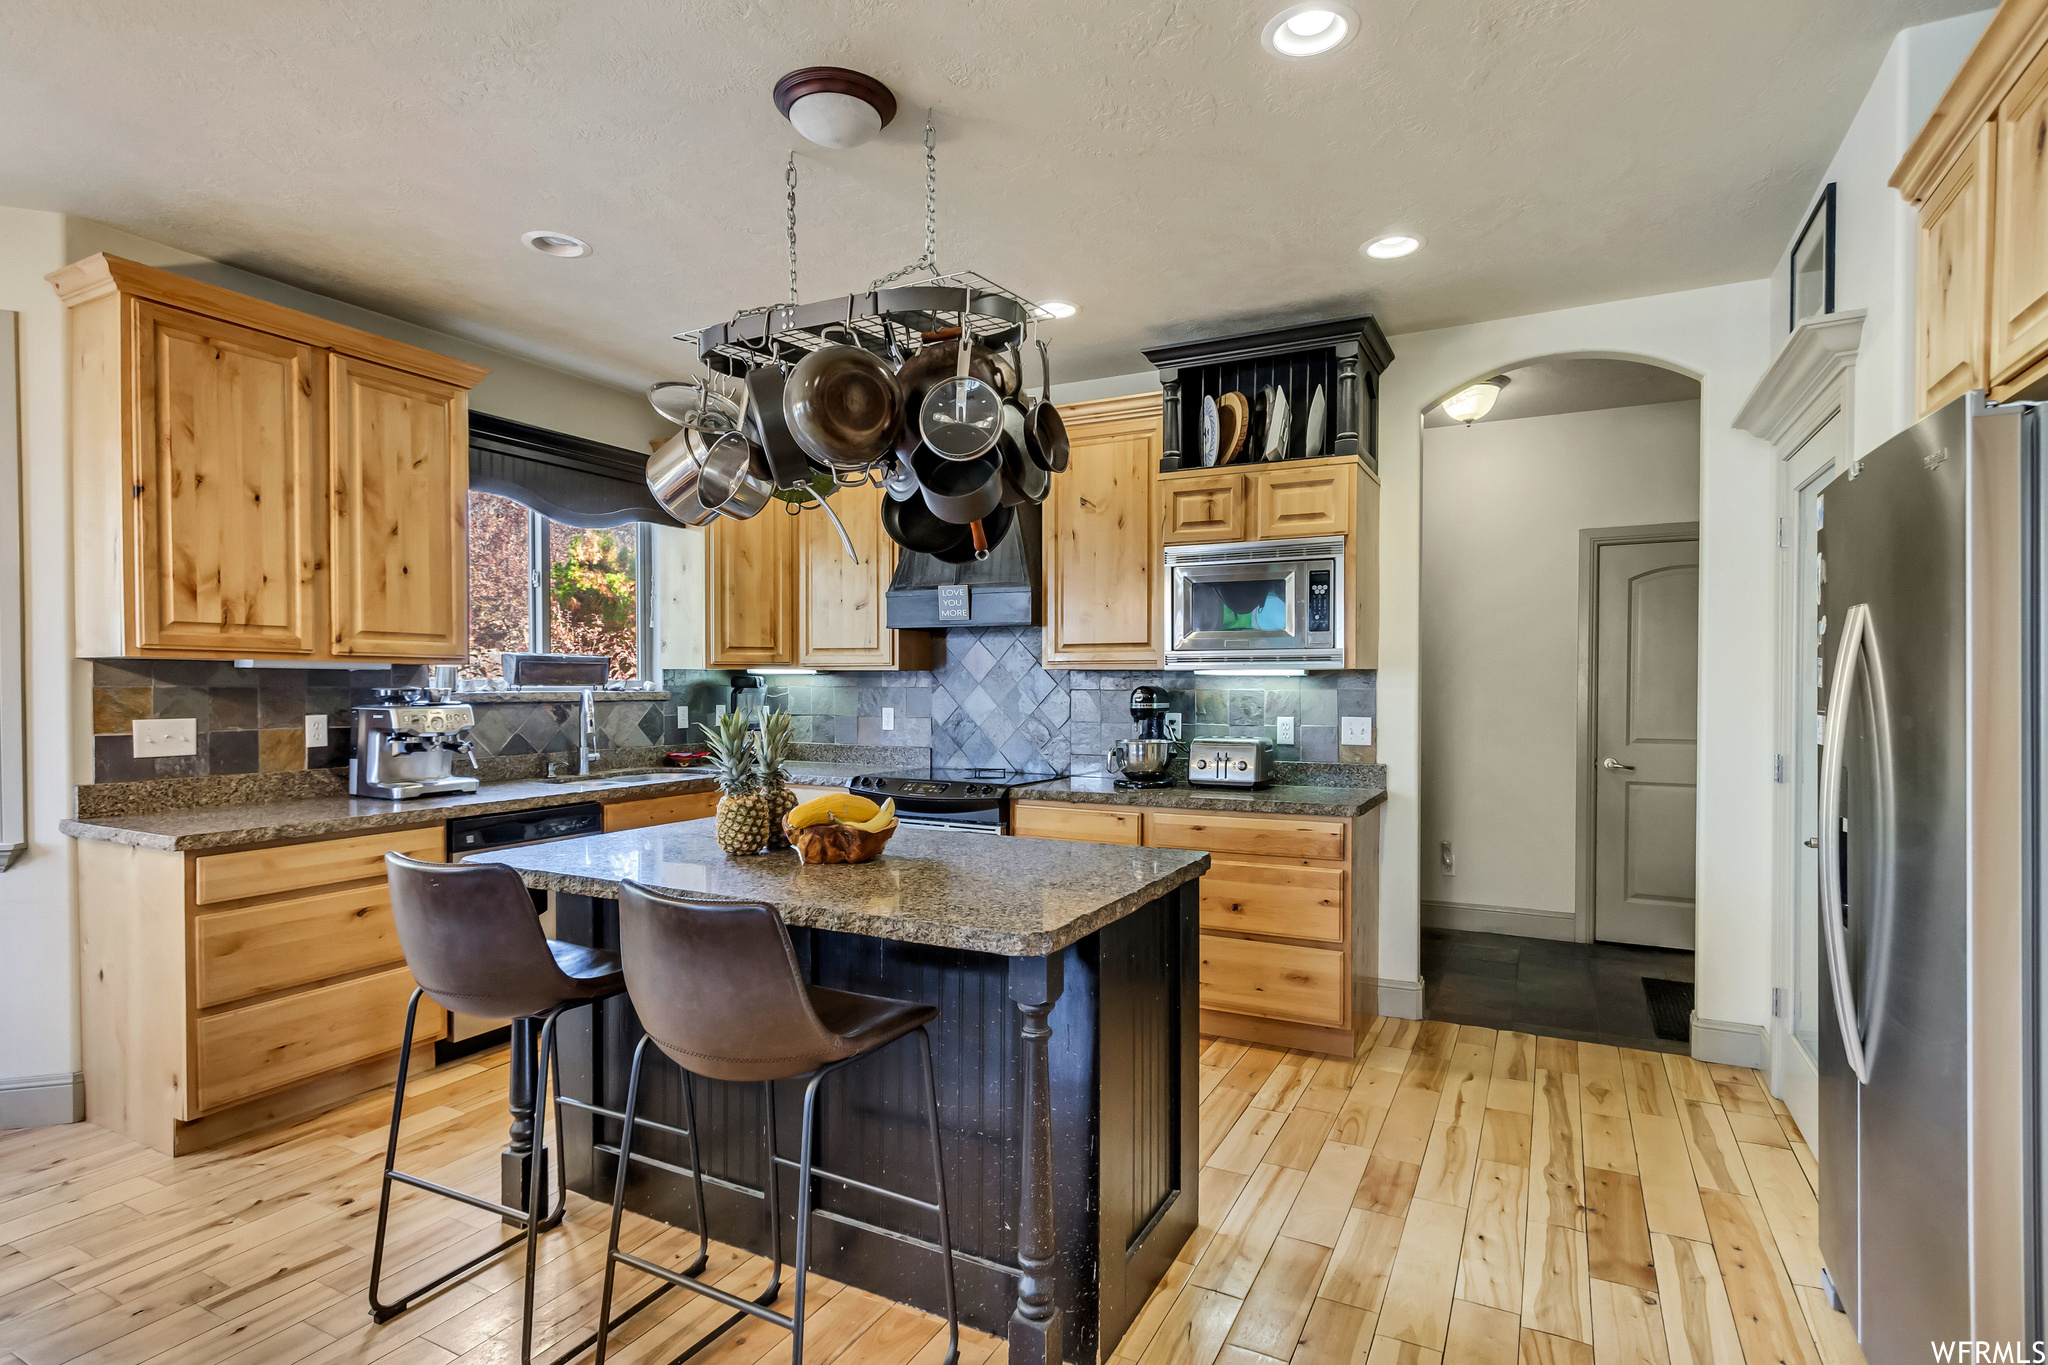 Kitchen featuring dark stone countertops, appliances with stainless steel finishes, a kitchen island, tasteful backsplash, and light wood-type flooring